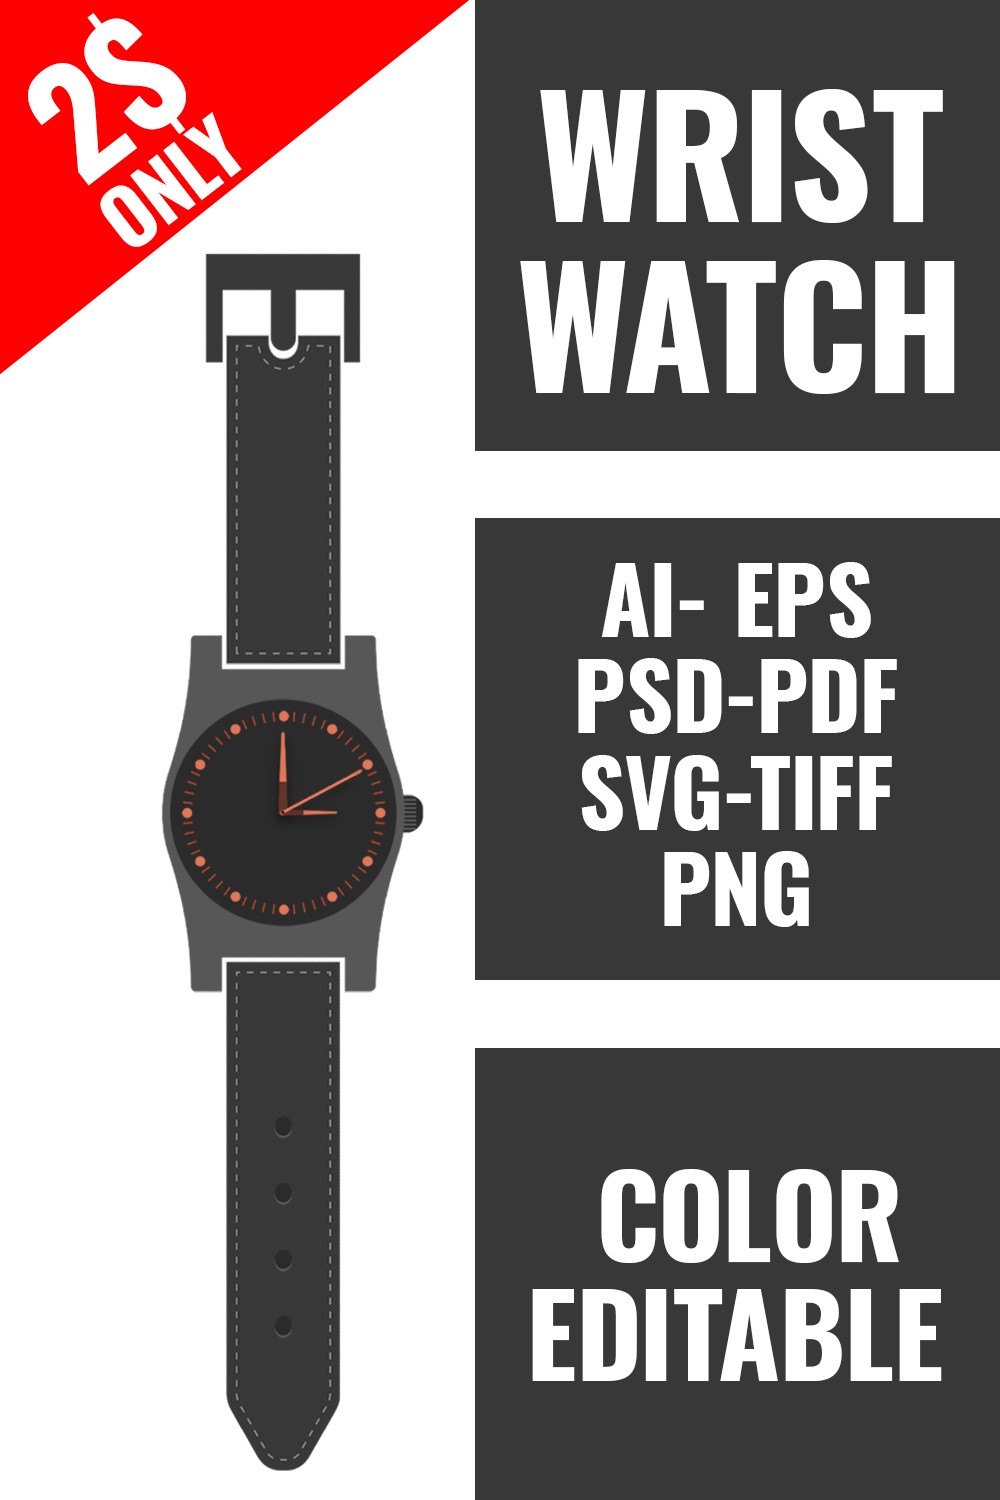 Use this watch mockup for your project.